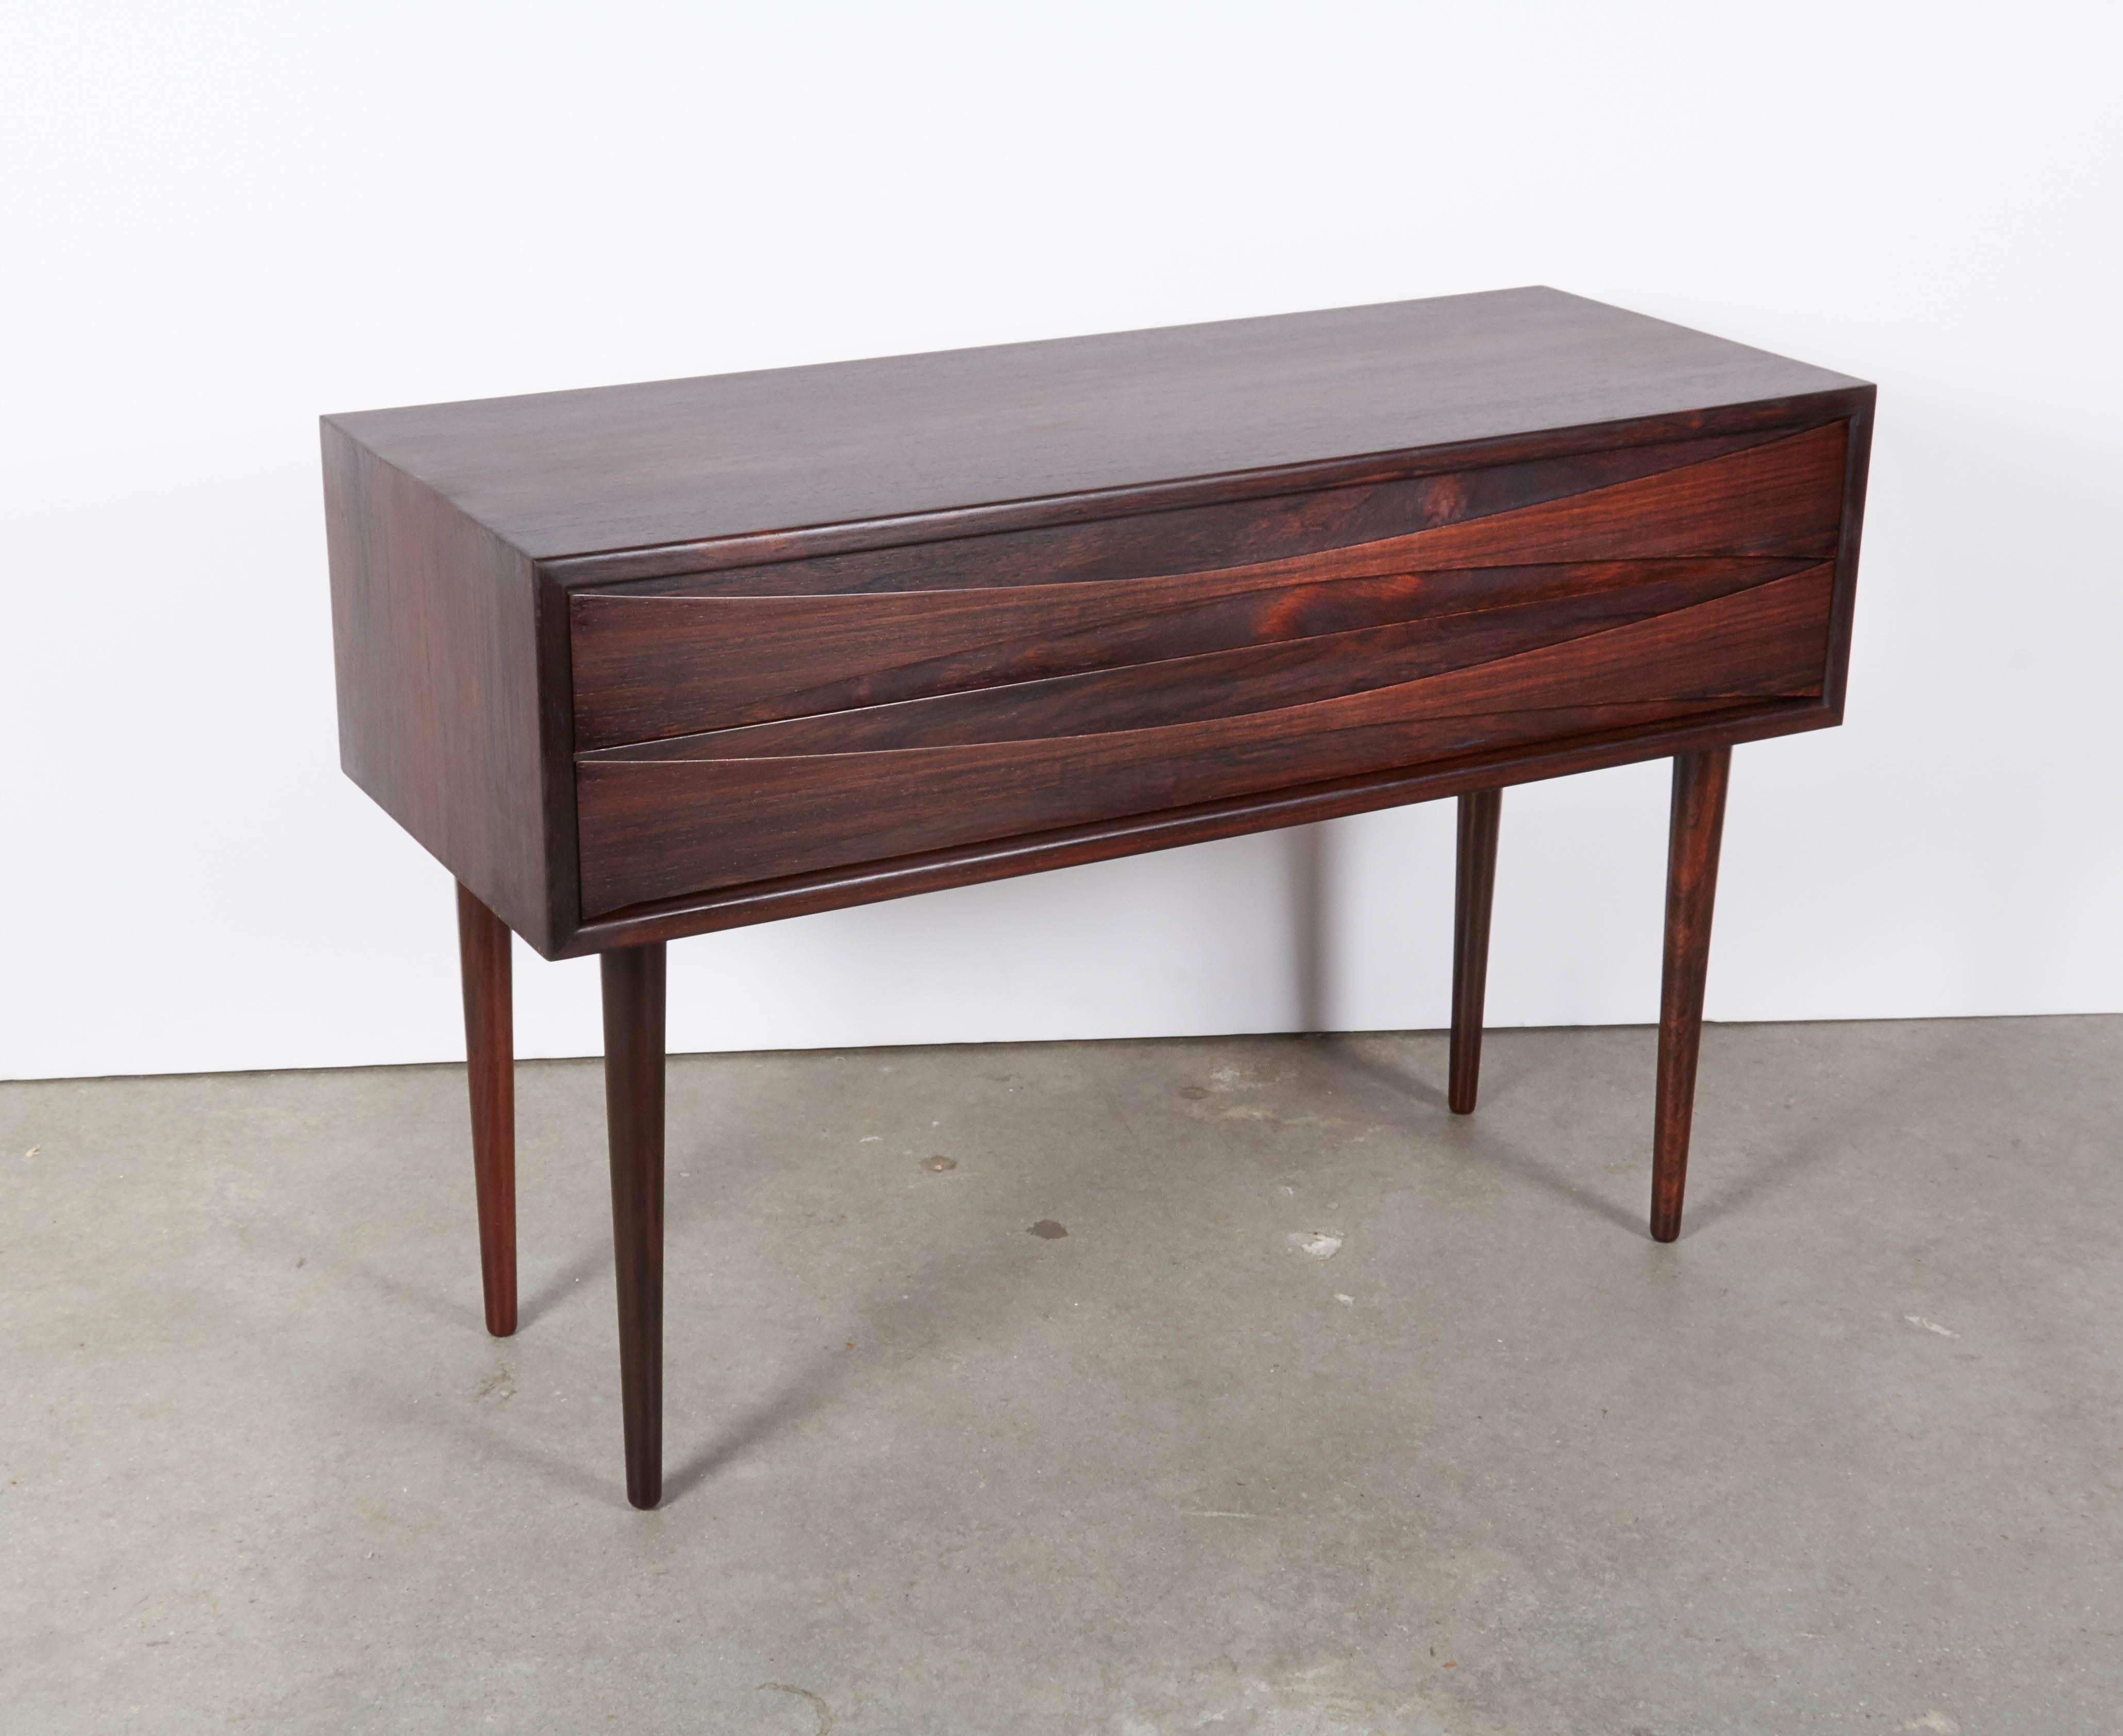 Vintage 1960s Rosewood Bowtie Nightstands by Arne Vodder

These long low bedside tables are in excellent condition, and stunningly beautiful. They each have 2 wide drawers enough for a lot of storage next to a sofa or a bed. Ready for pick up,